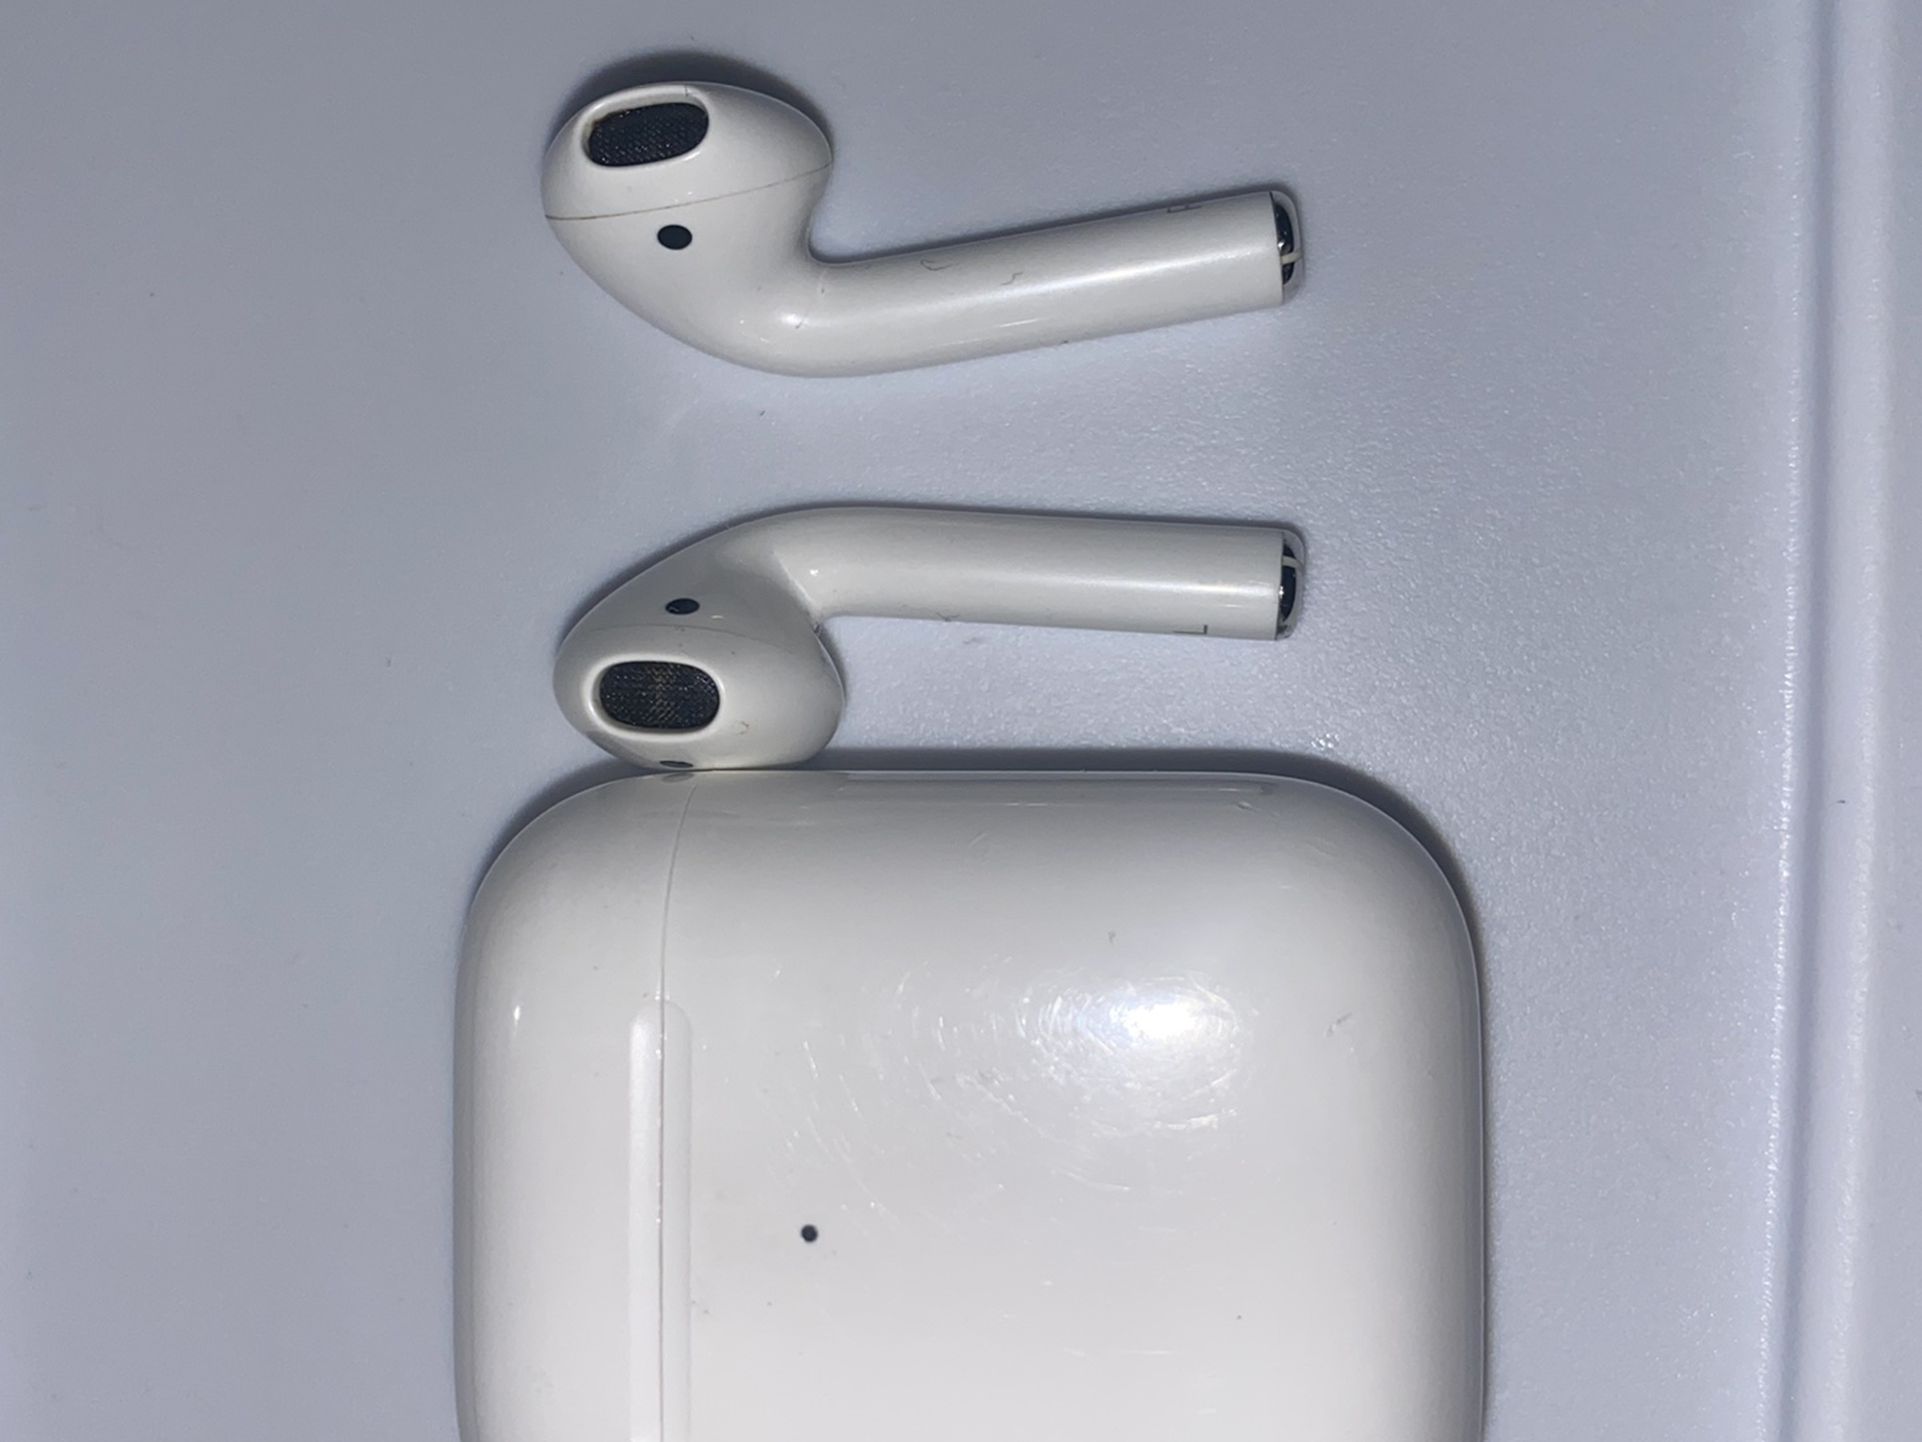 APPLE AIRPOD ( With Charging Case )